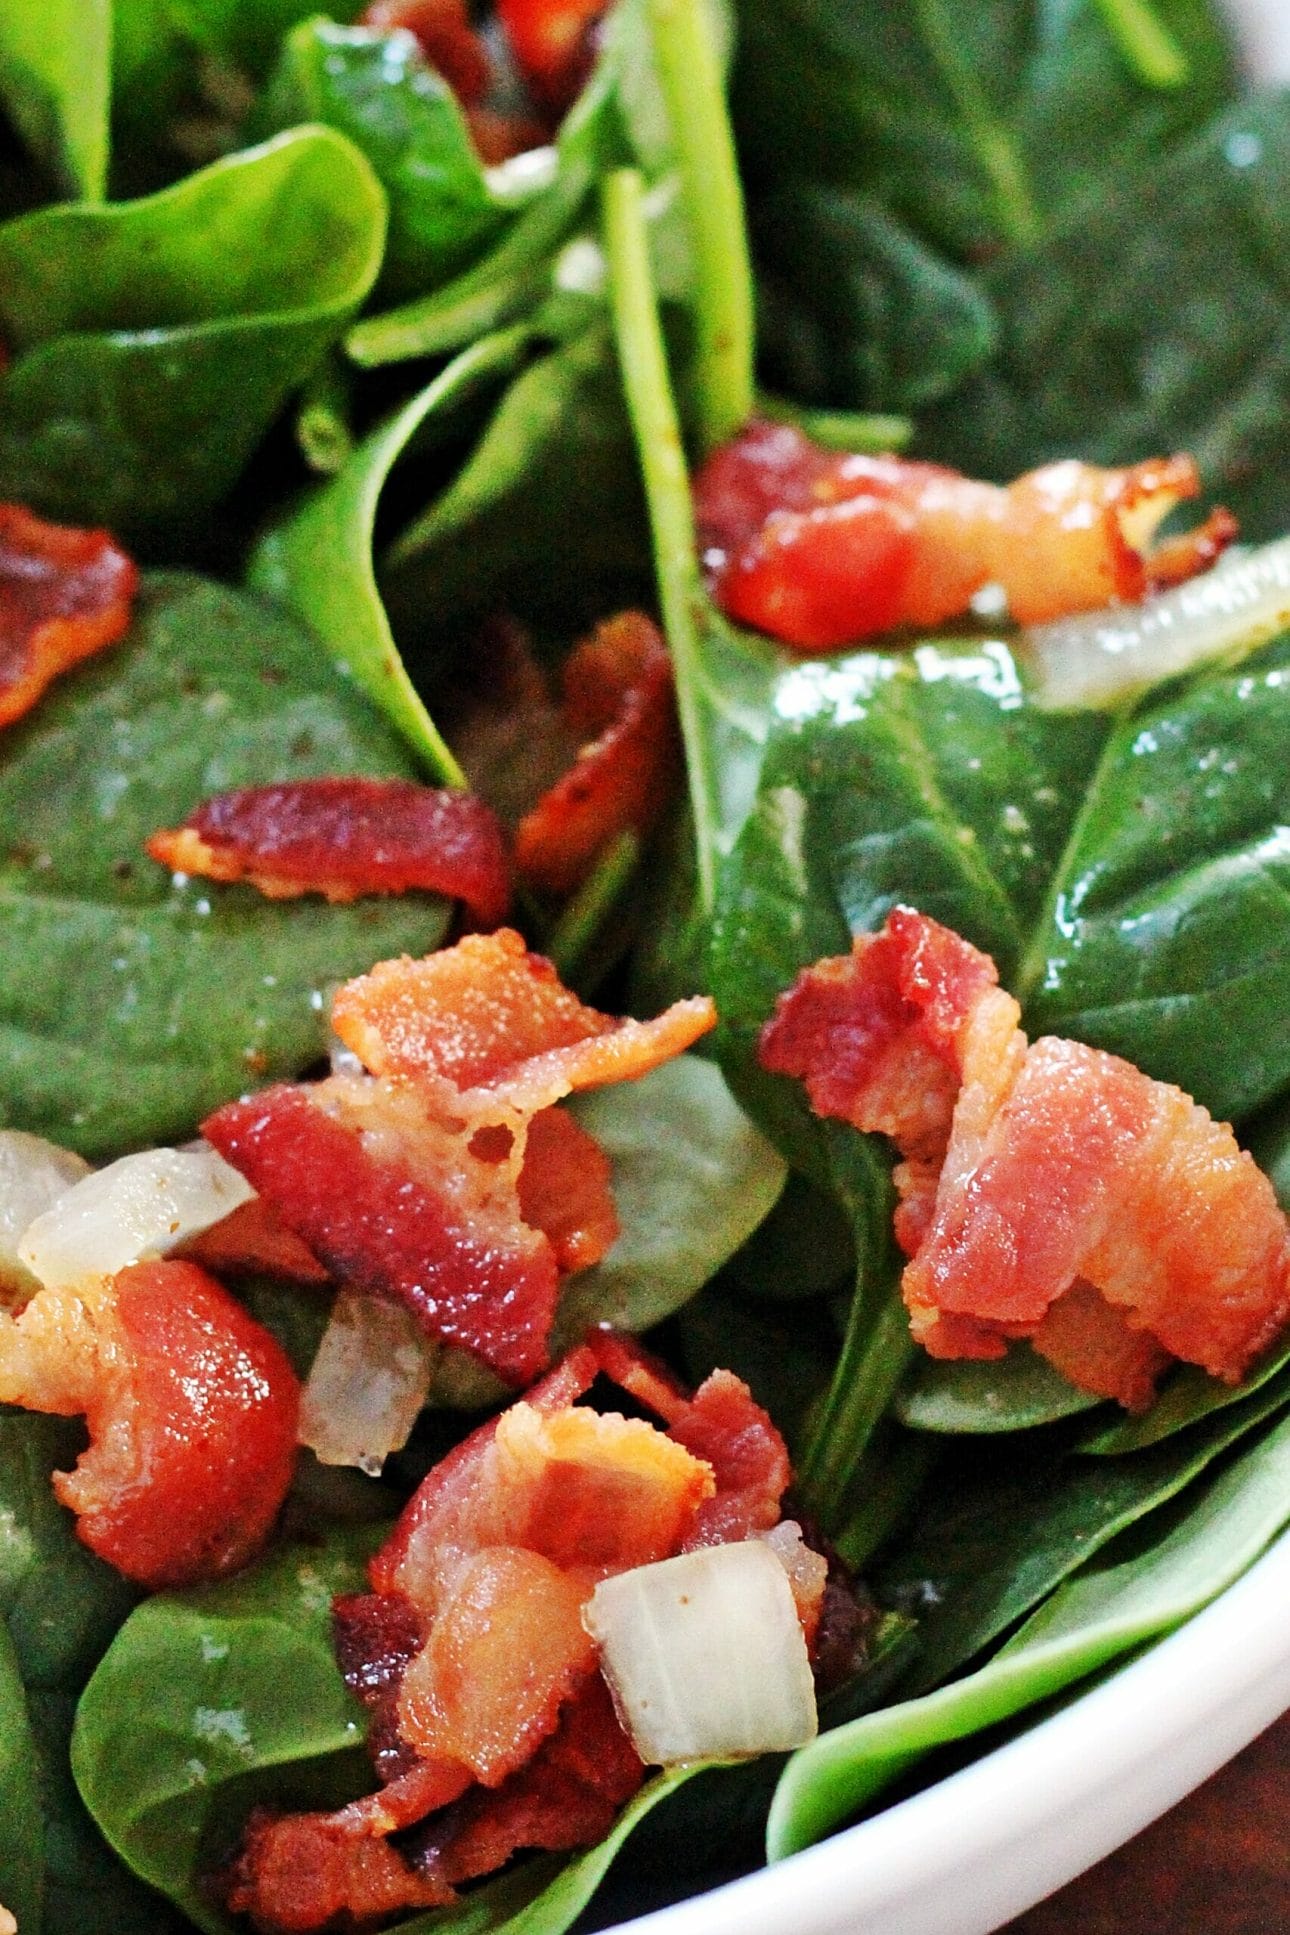 Spinach Salad with Hot Bacon Dressing